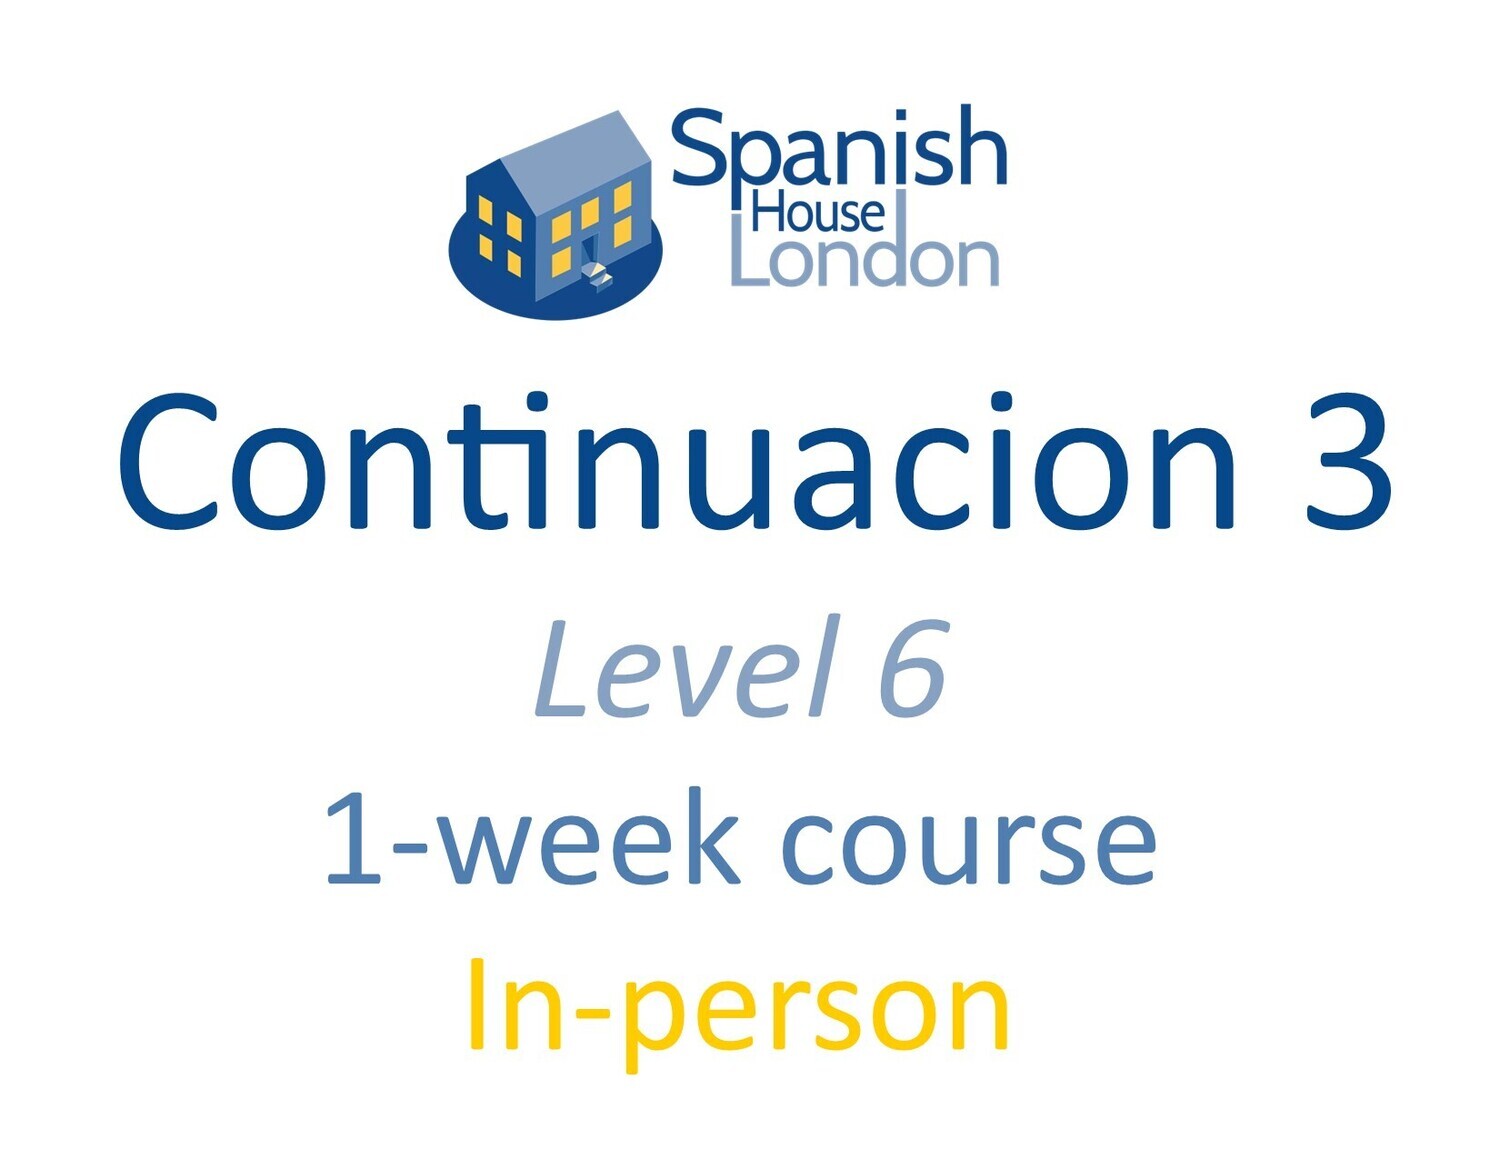 One-Week Intensive Continuación 3 Course starting on 15th April at 10.30am in Clapham North